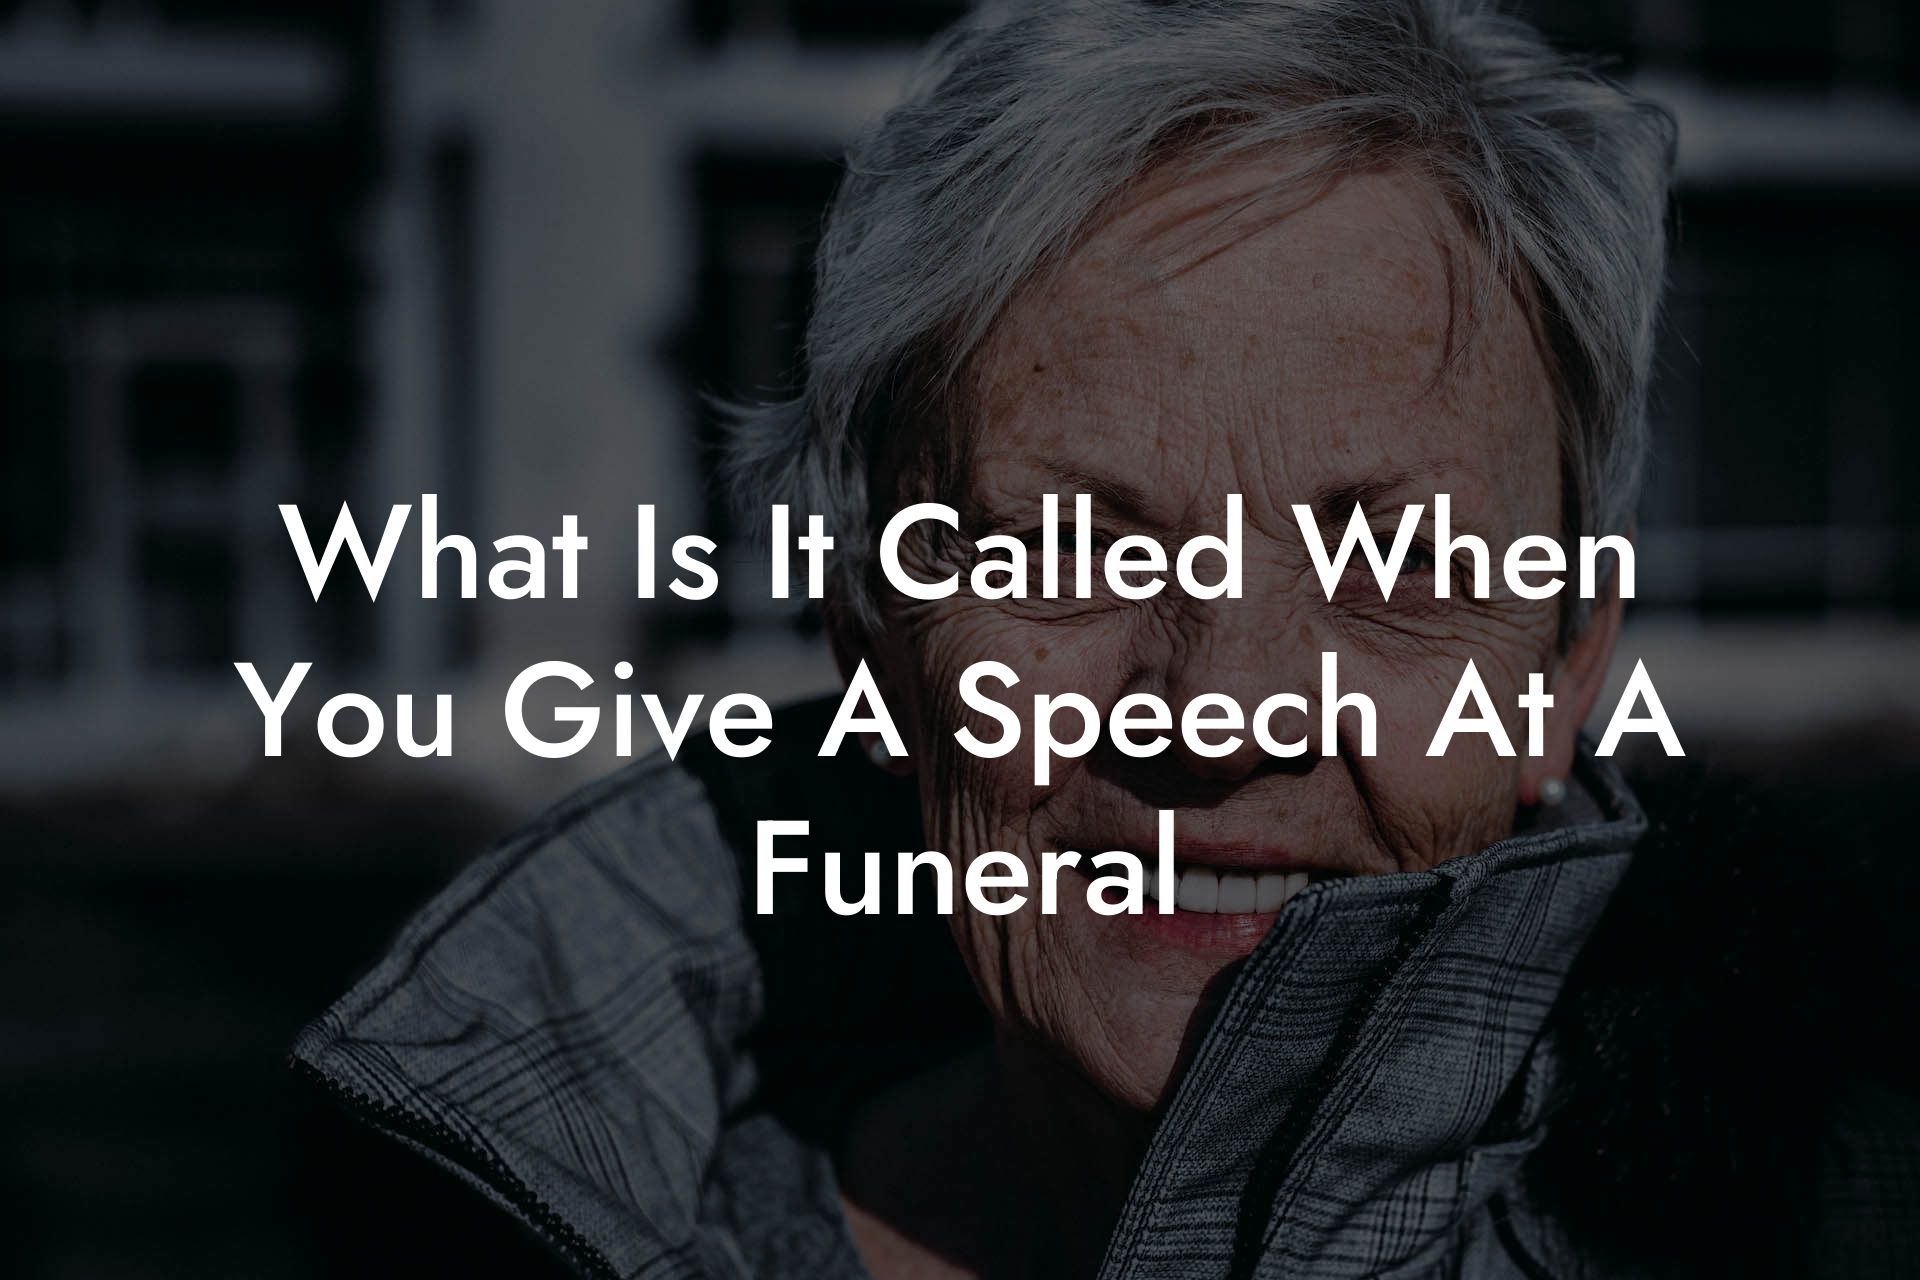 What Is It Called When You Give A Speech At A Funeral?